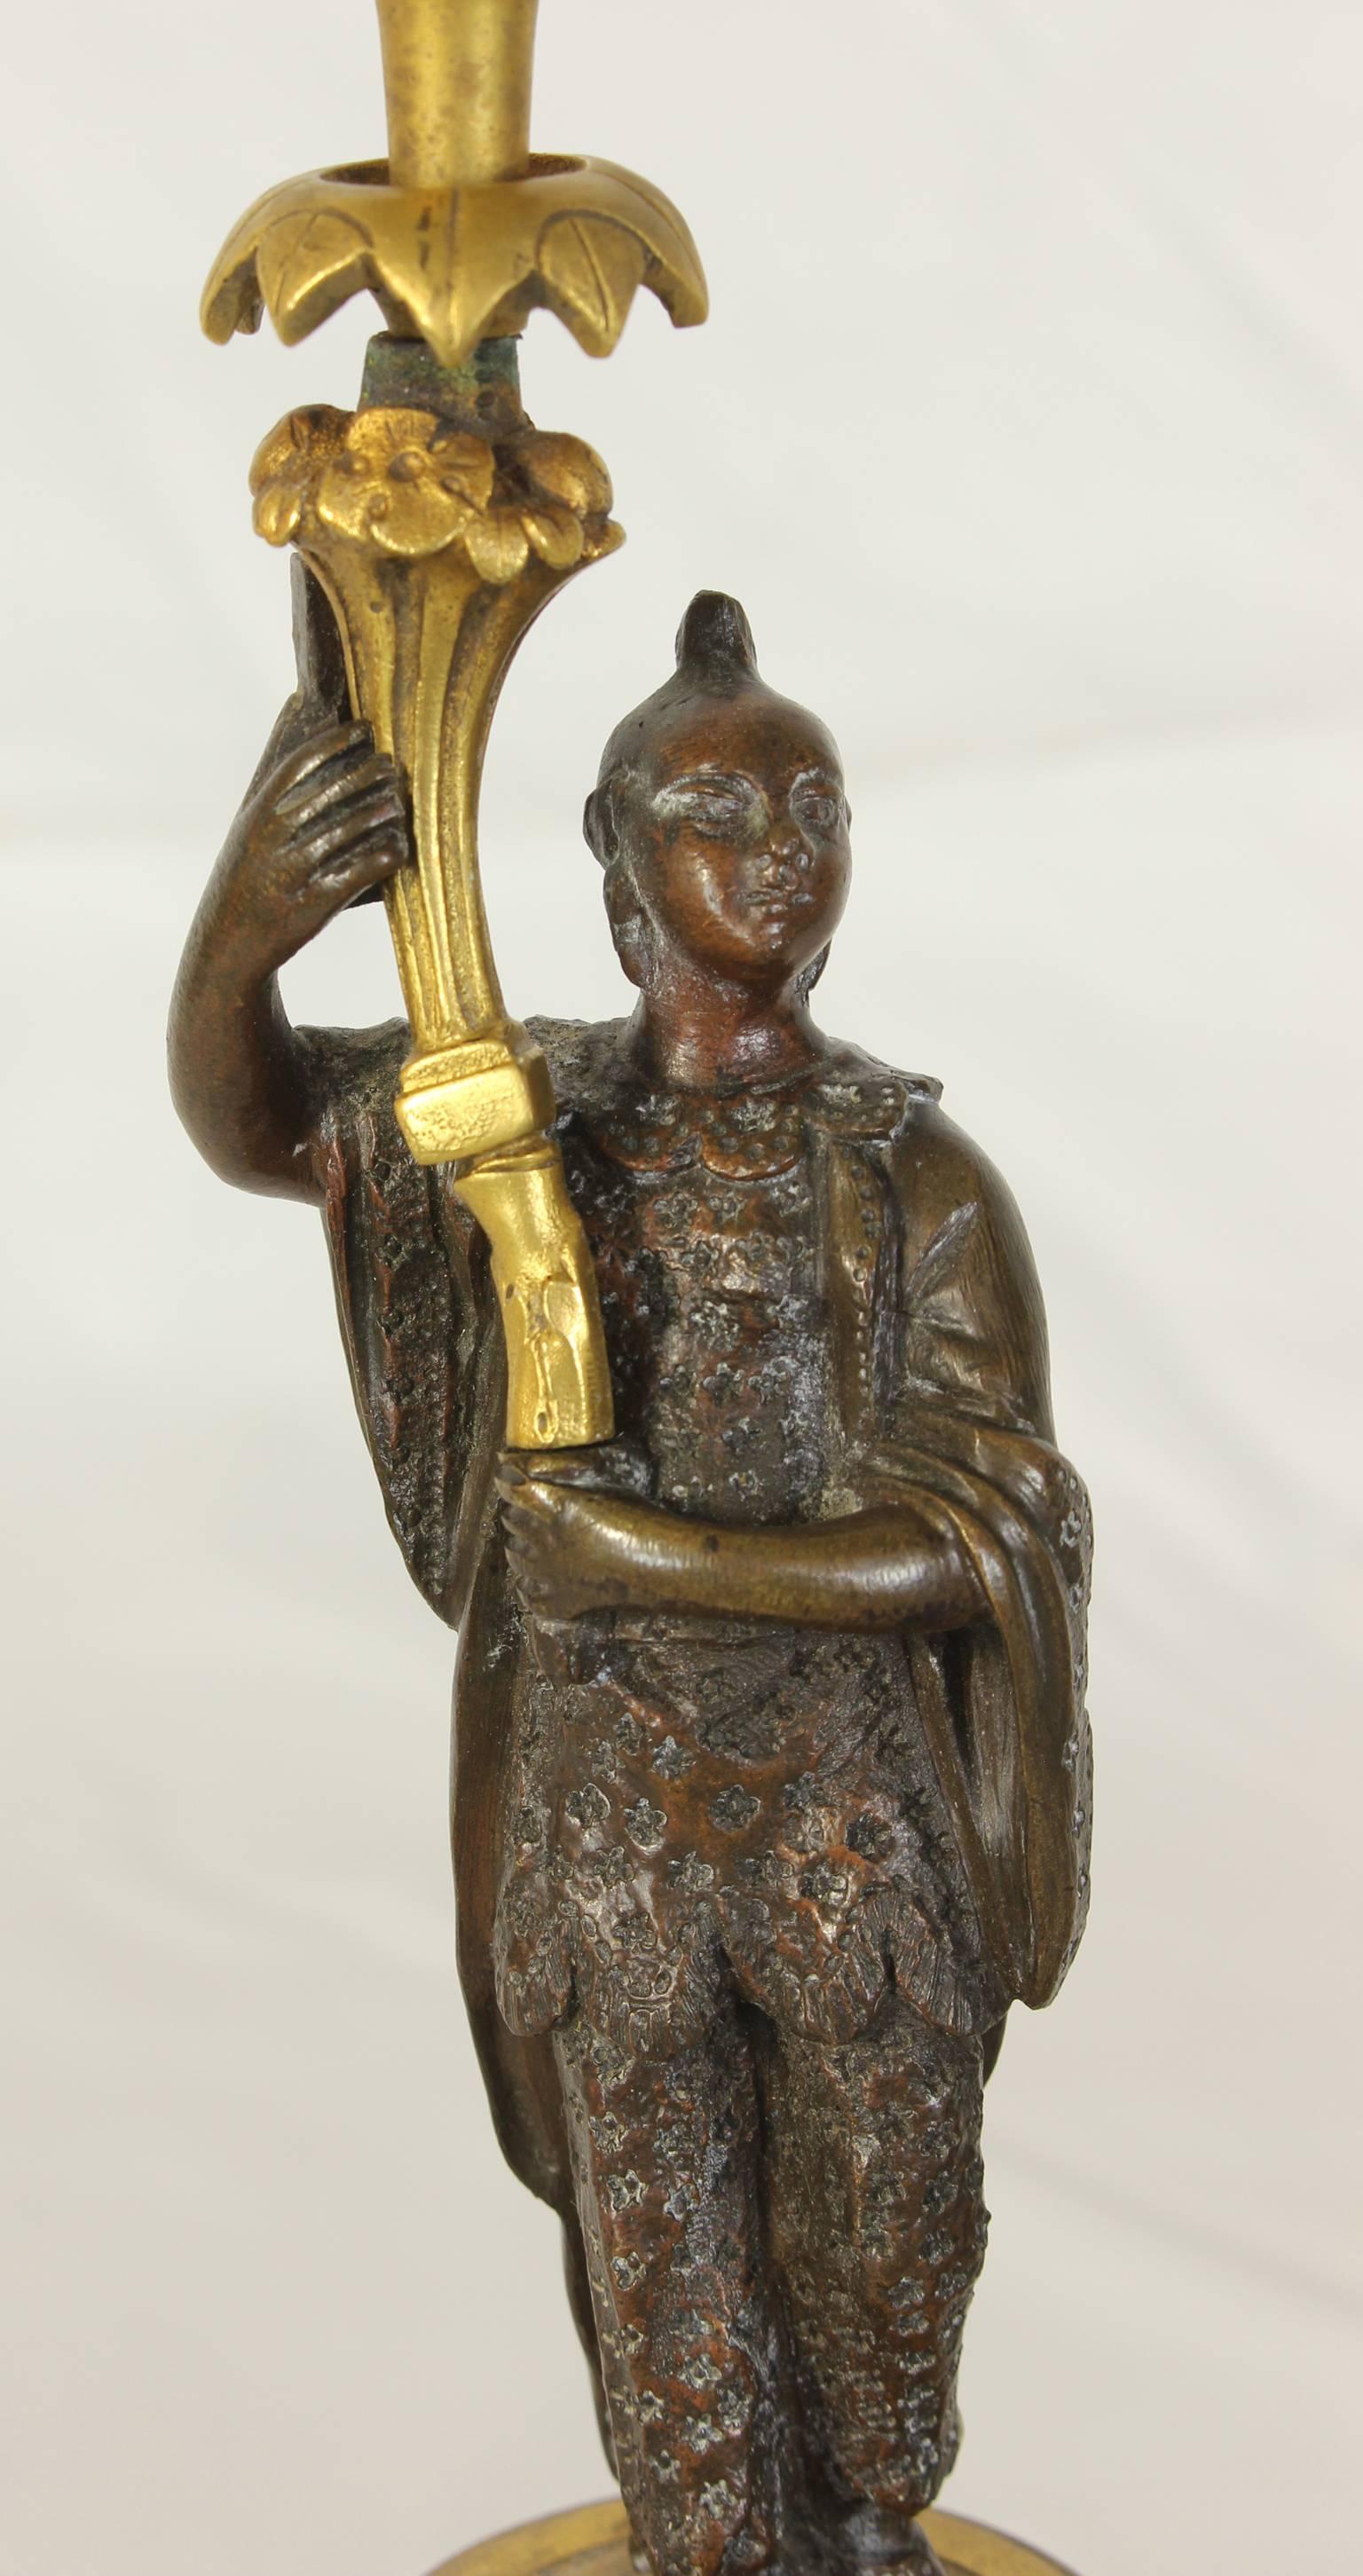 Pair of Early 19th Century Chinoiserie Figural Candlesticks In Excellent Condition For Sale In Kilmarnock, VA